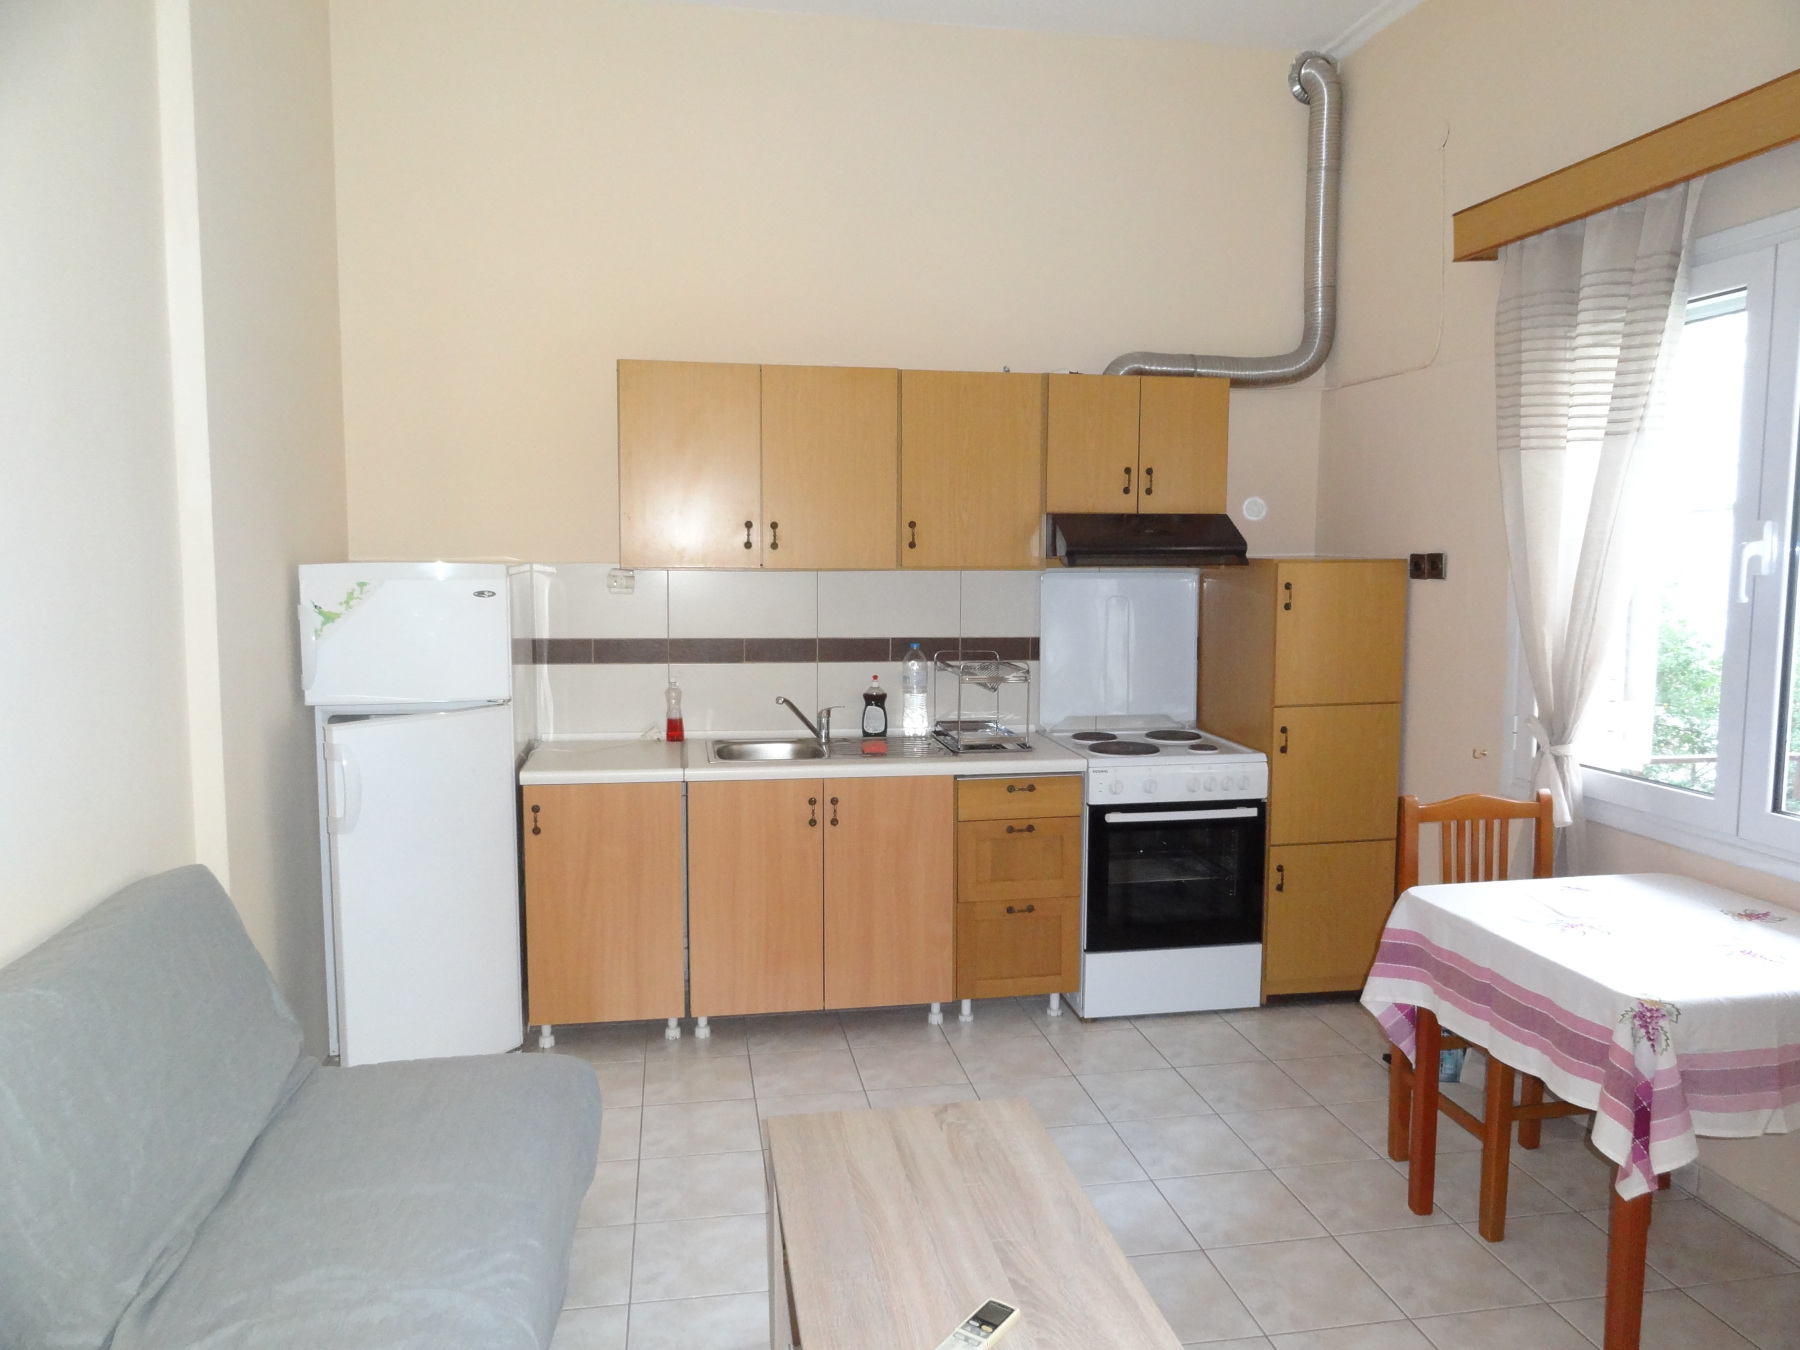 Renovated furnished 1 bedroom apartment of 53 sq.m. for rent 1st floor in the center of Ioannina near the Town Hall